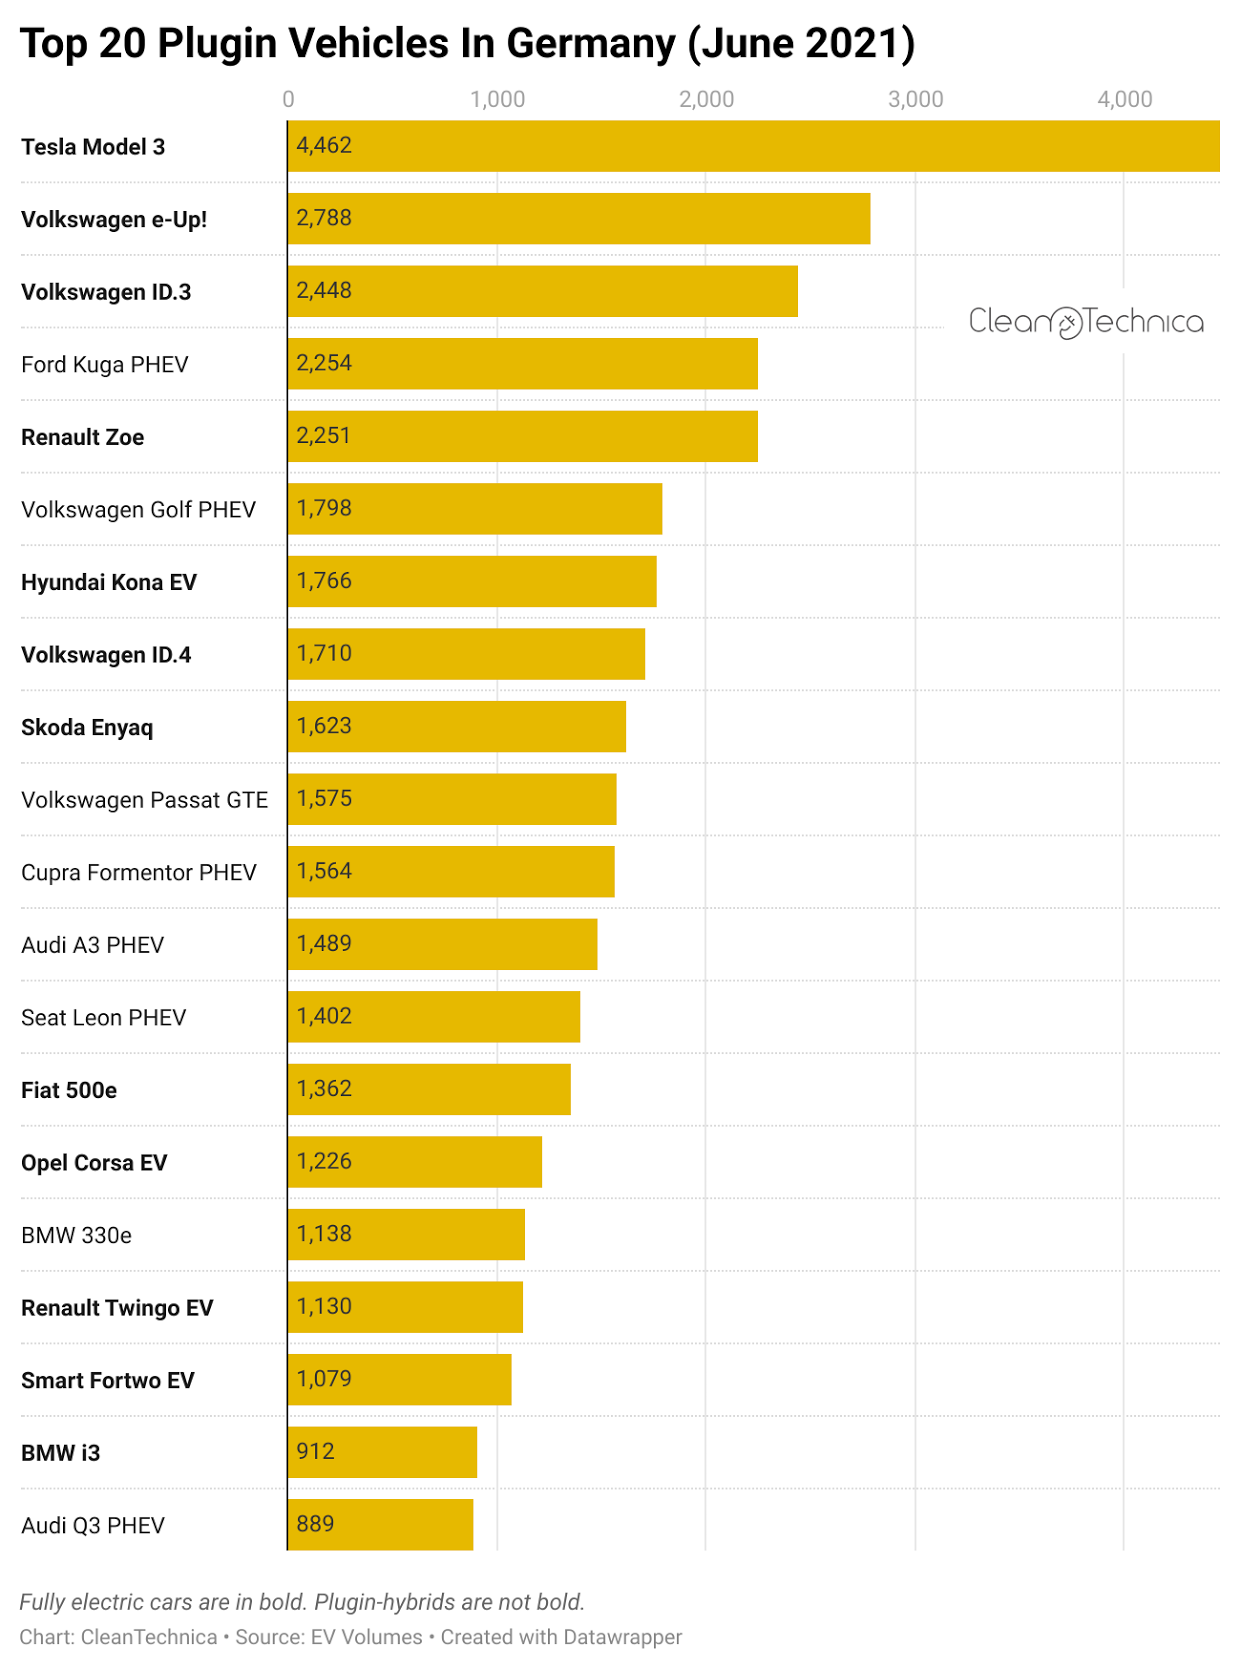 Germany-top-20-electric-vehicles-in-June-2021-CleanTechnica-logo.png